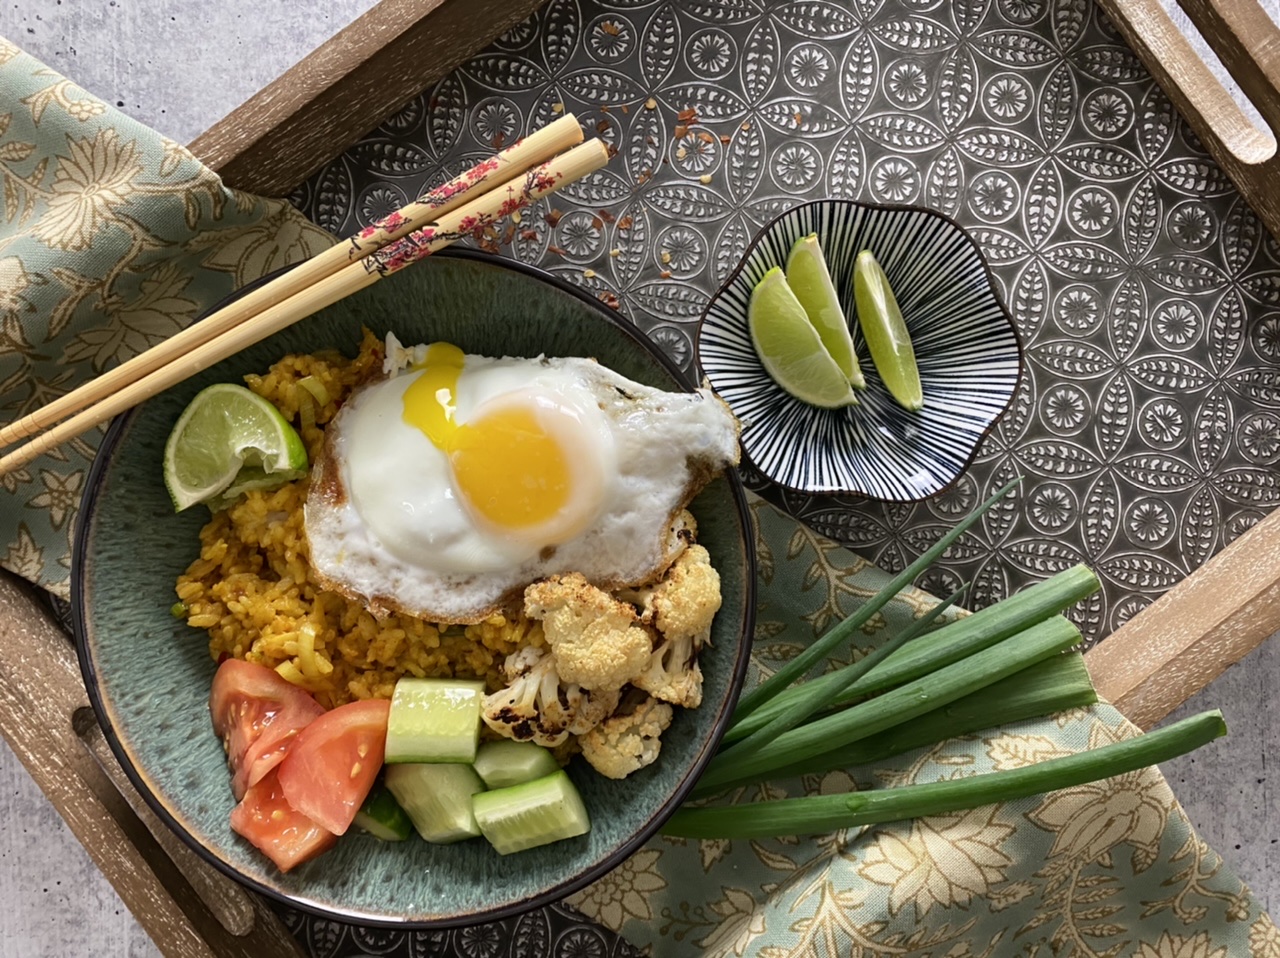 Indonesian fried rice in a green bowl with chop sticks and a fried rice on a serving tray